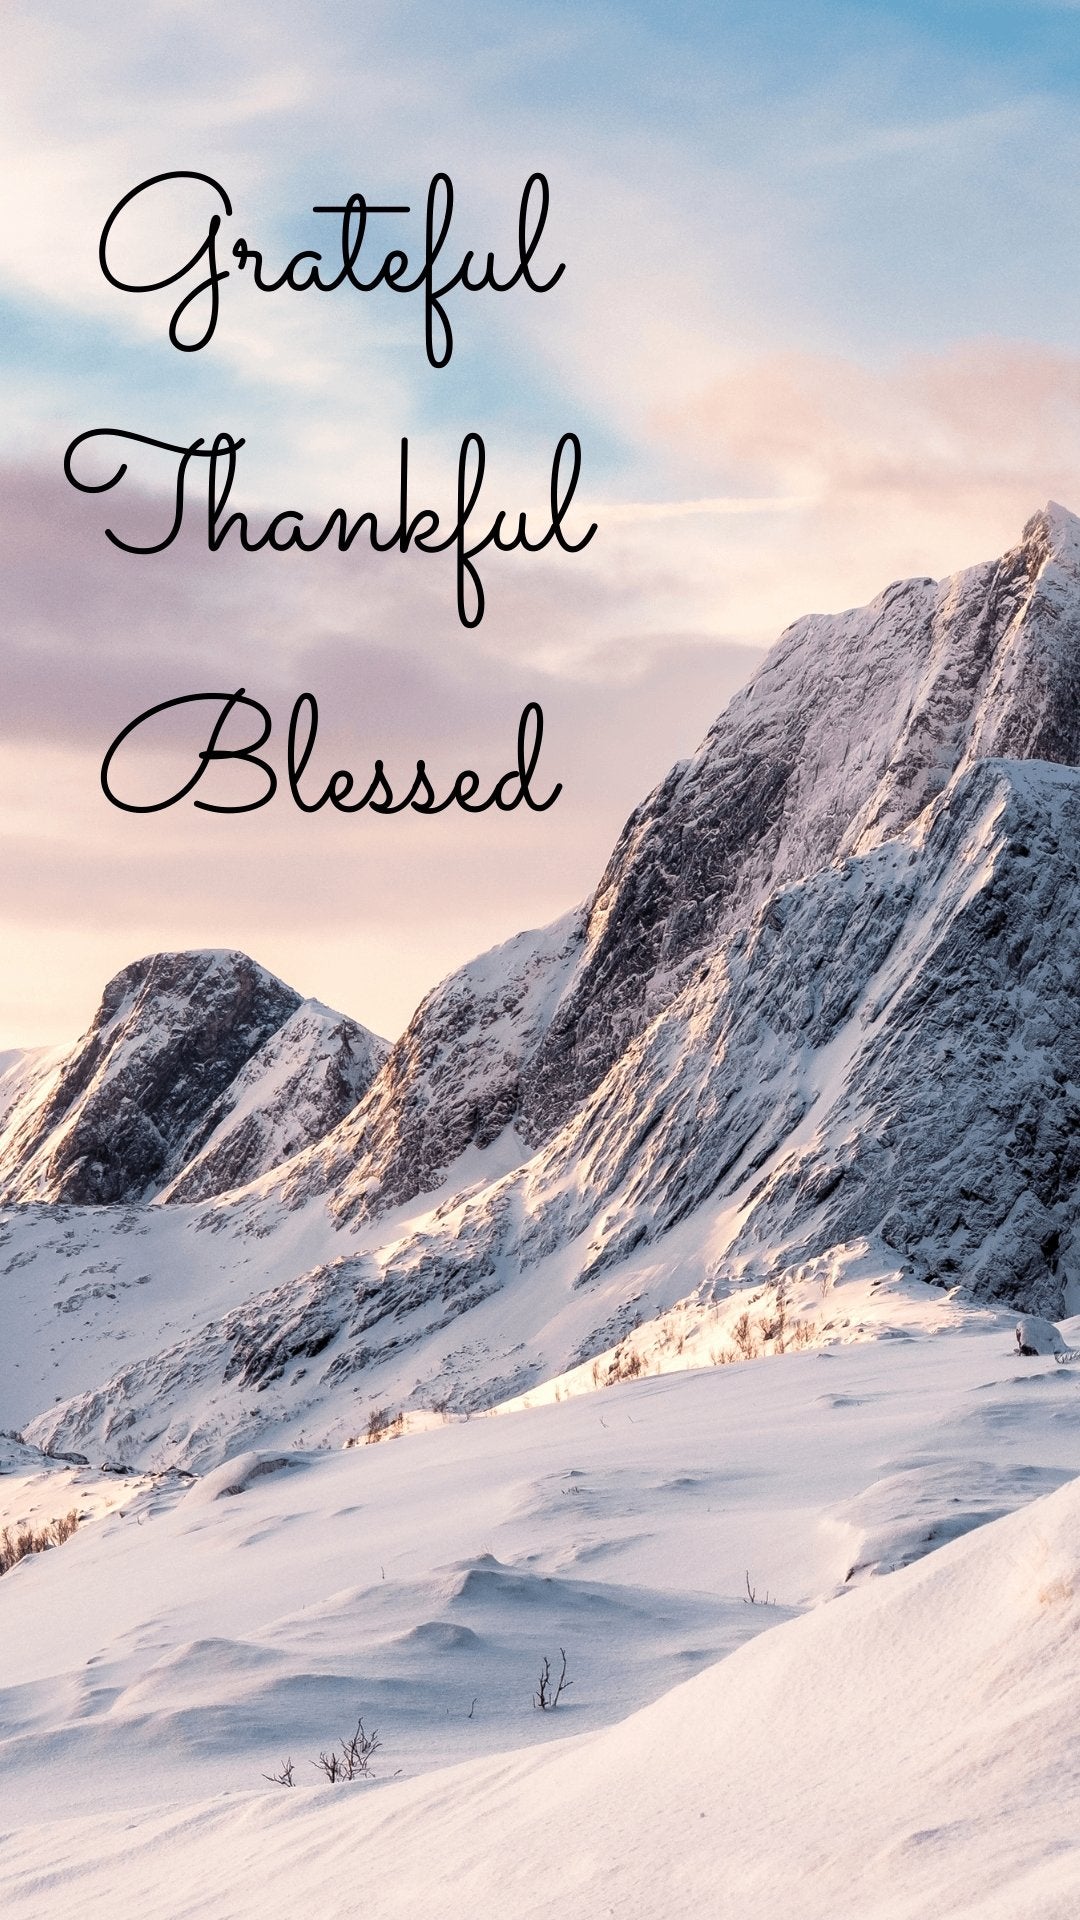 Nebraska Christian on Twitter With deep appreciation for your love  prayers and support the NCC family wishes you and your loved ones a very blessed  Thanksgiving We sincerely thank God for you 